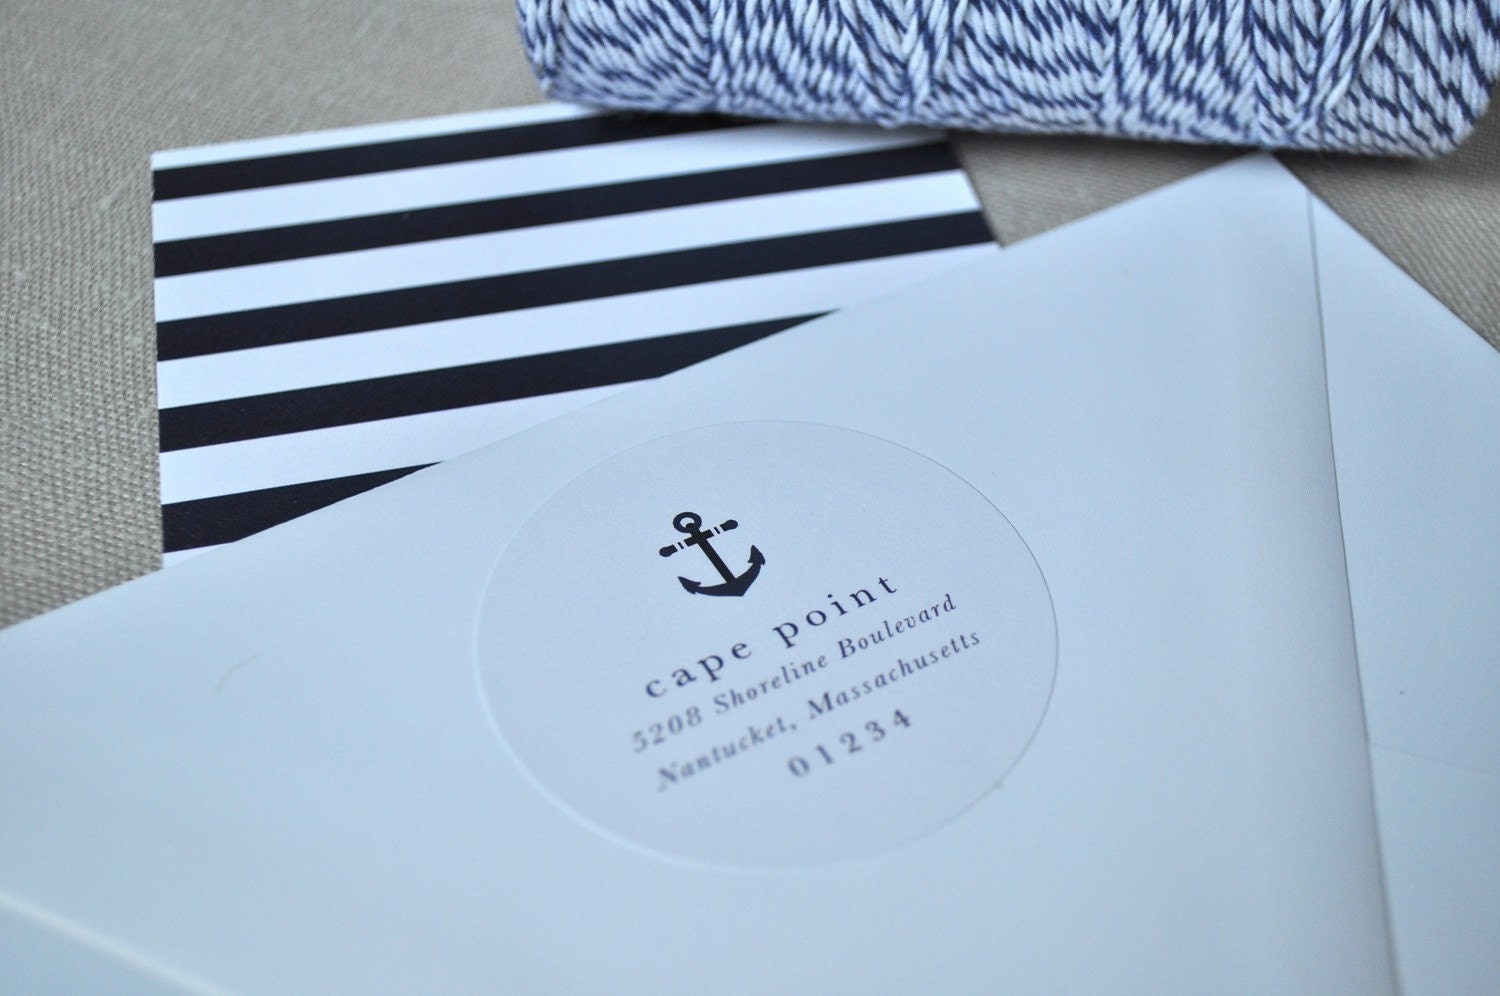 Anchor Collection Nautical Stationery Suite (note cards, envelopes & return address stickers)